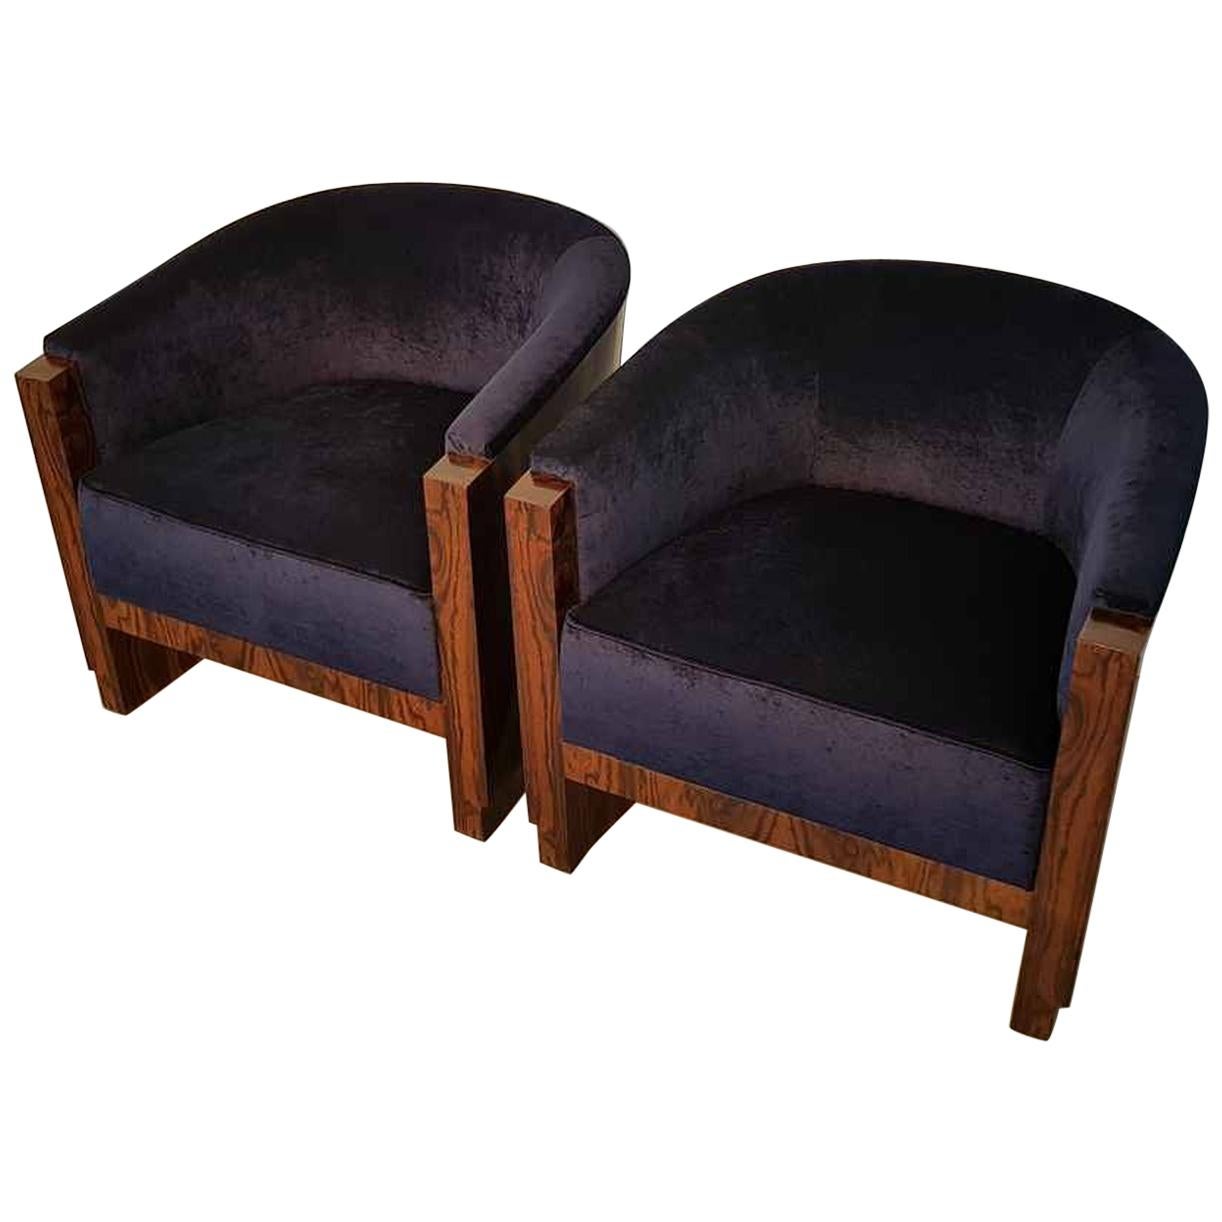 Pair of French Art Deco Armchairs with Ziricote Wood and Navy Blue Upholstery For Sale